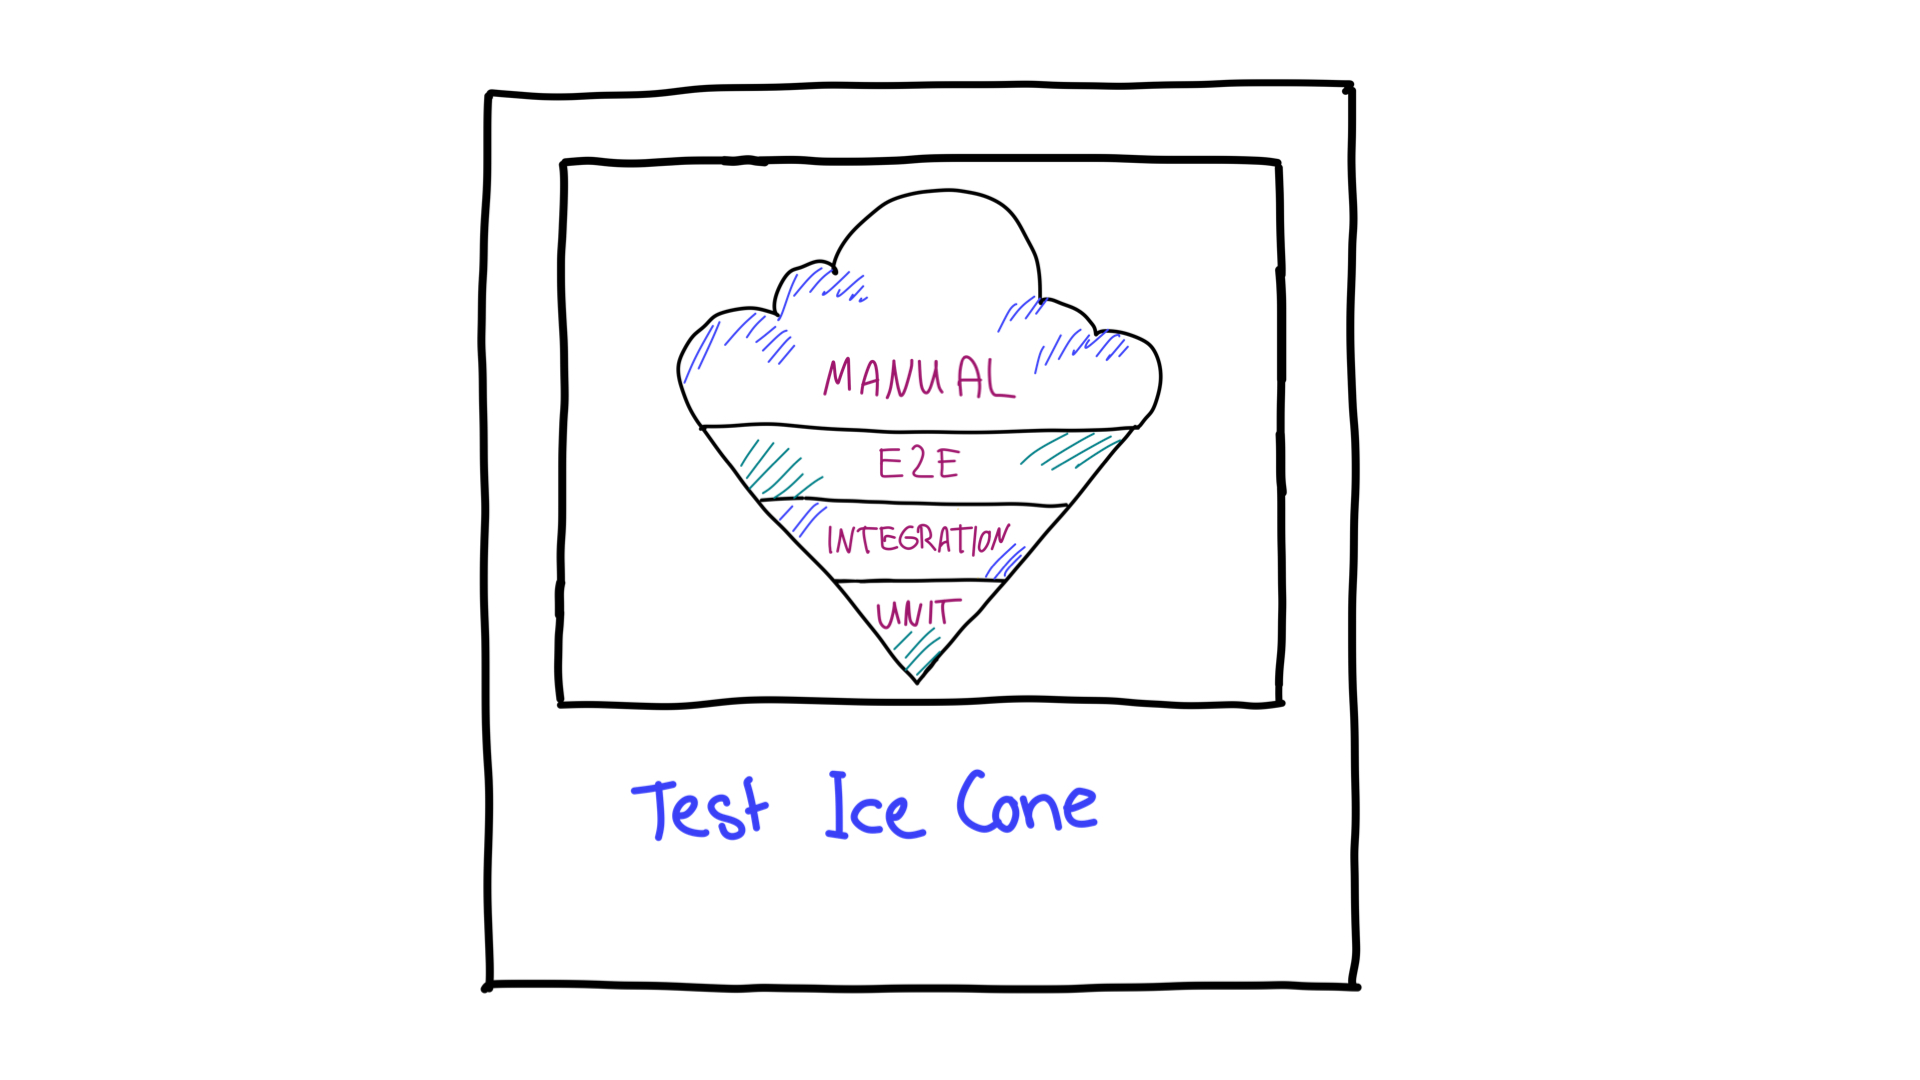 The testing ice cone.